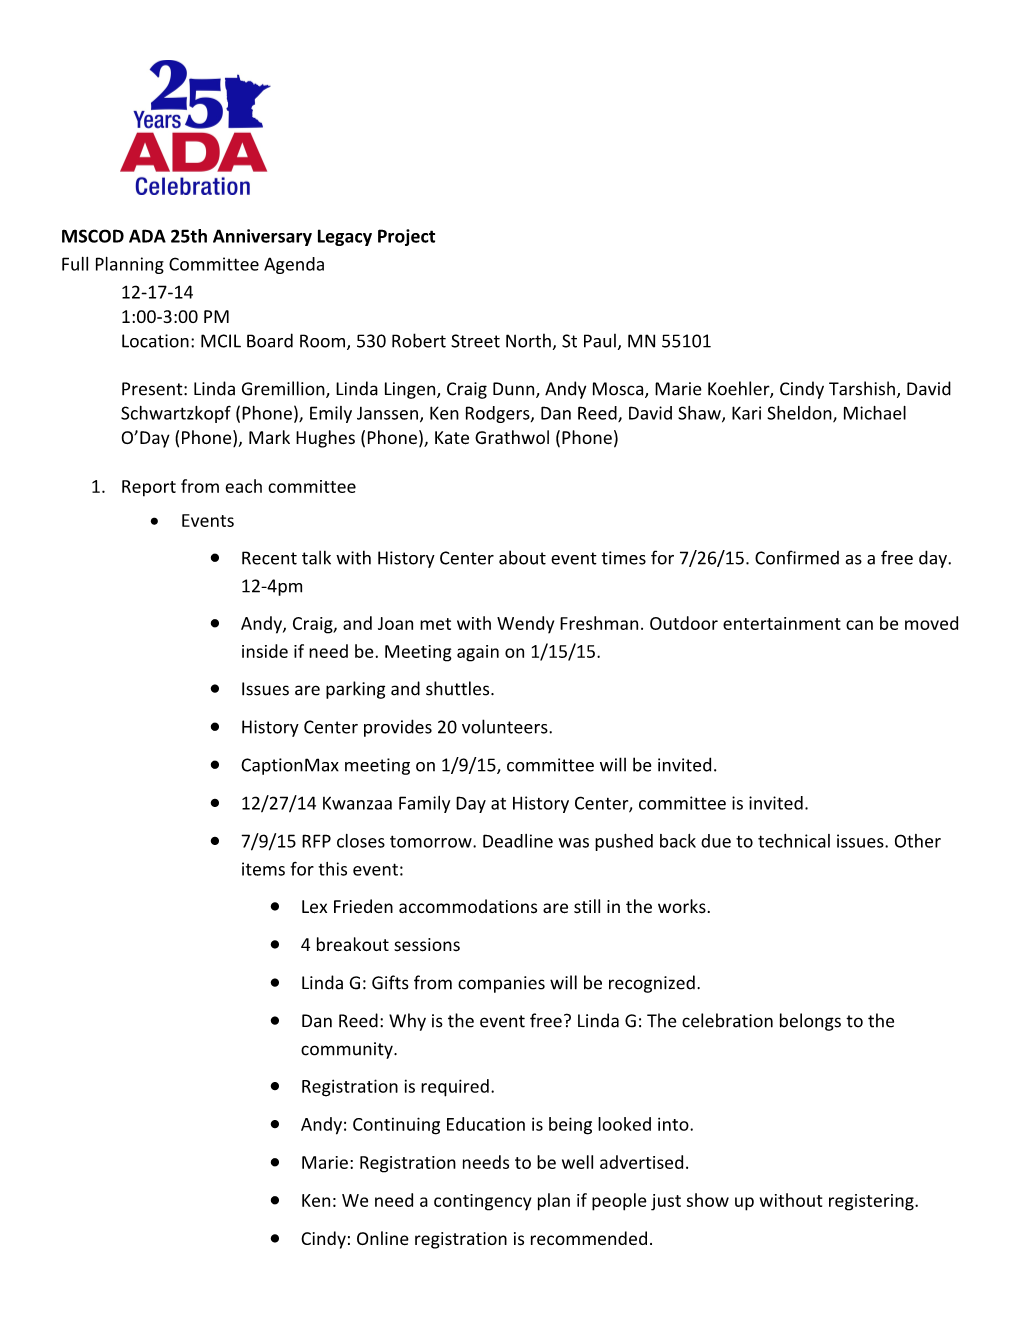 Full Planning Committee Notes, 12-17-14